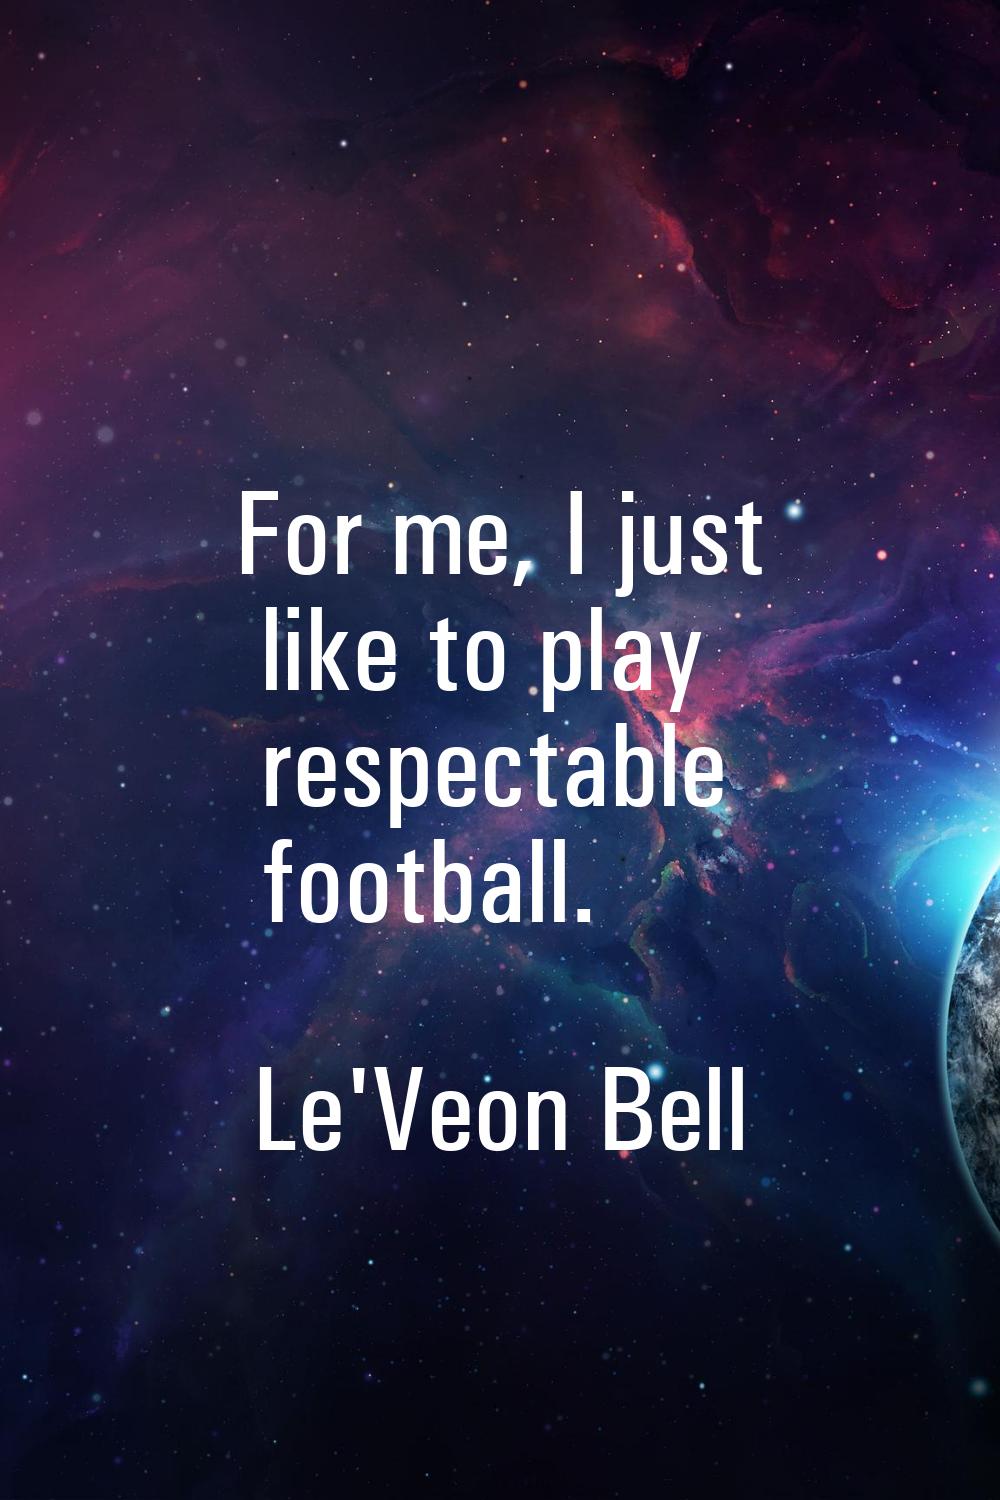 For me, I just like to play respectable football.